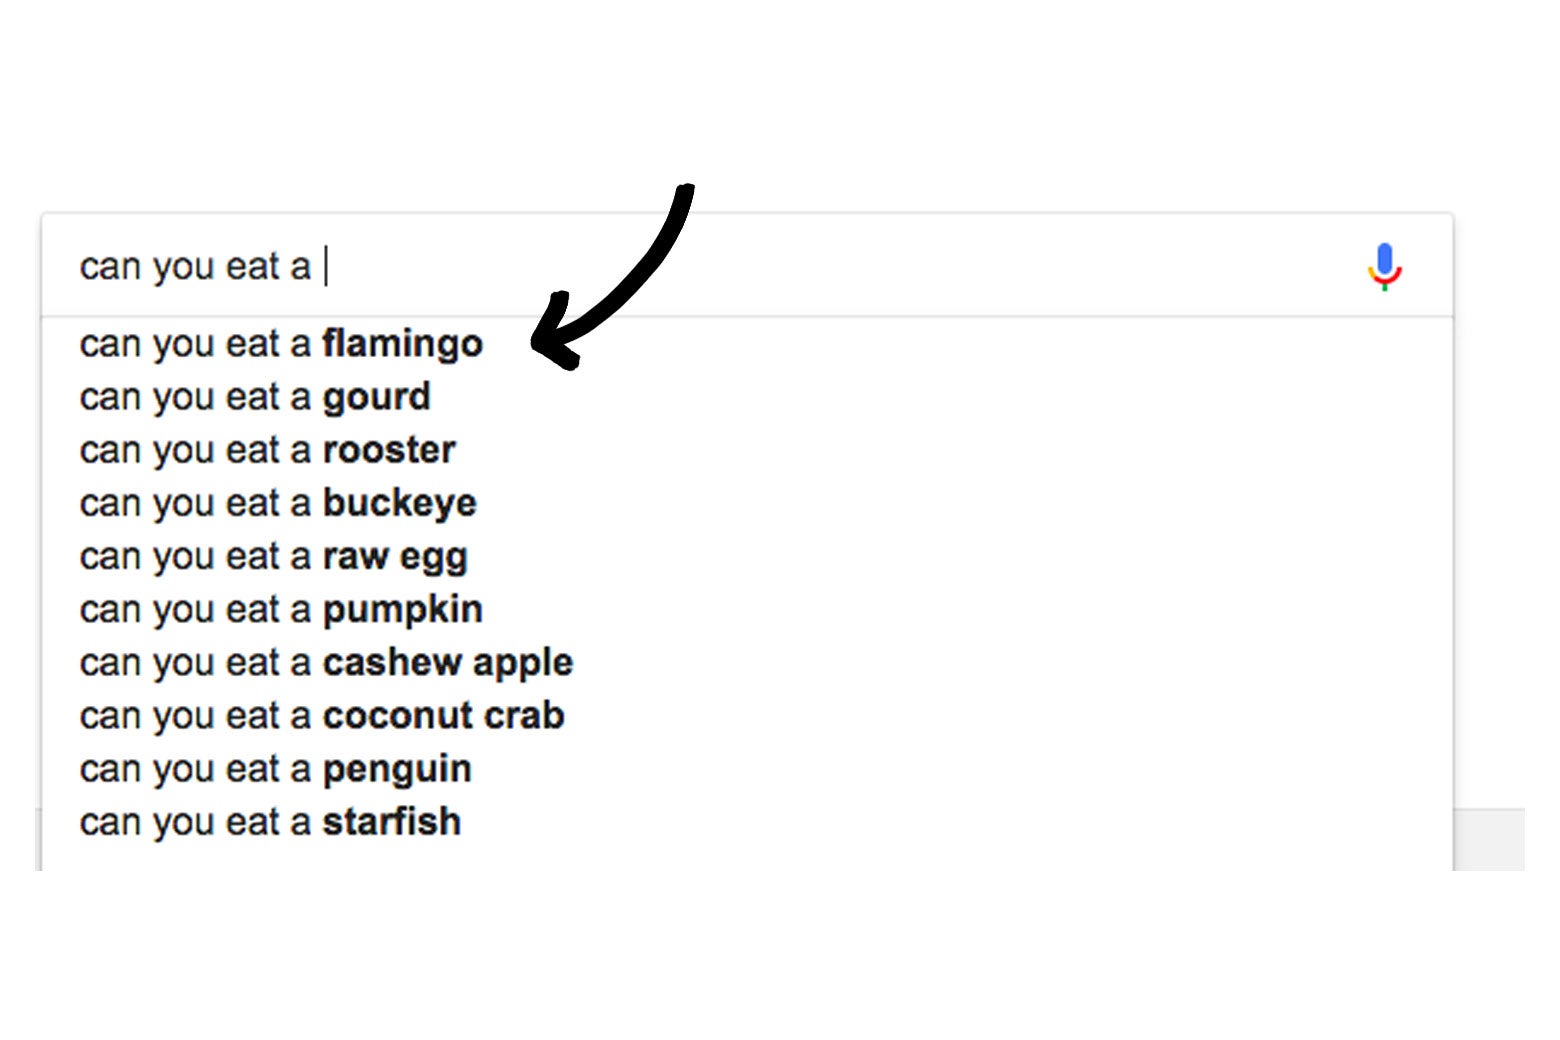 Google autocomplete suggesting that you eat a flamingo, the sickos